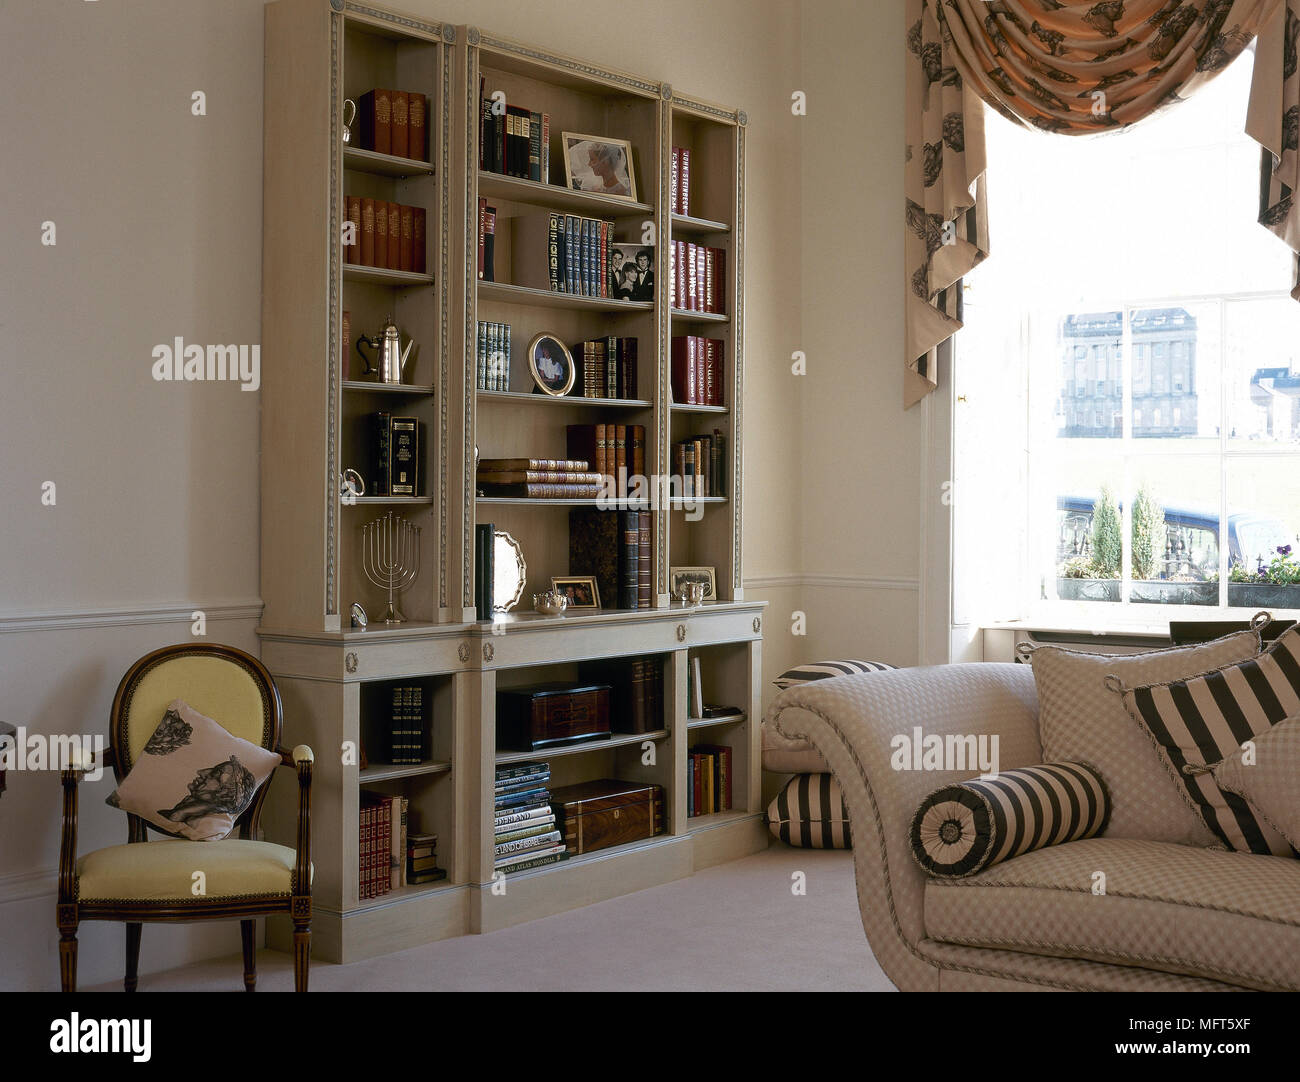 A traditional, neutral sitting room with bookcase, swag curtains, sofa, period chair, Stock Photo